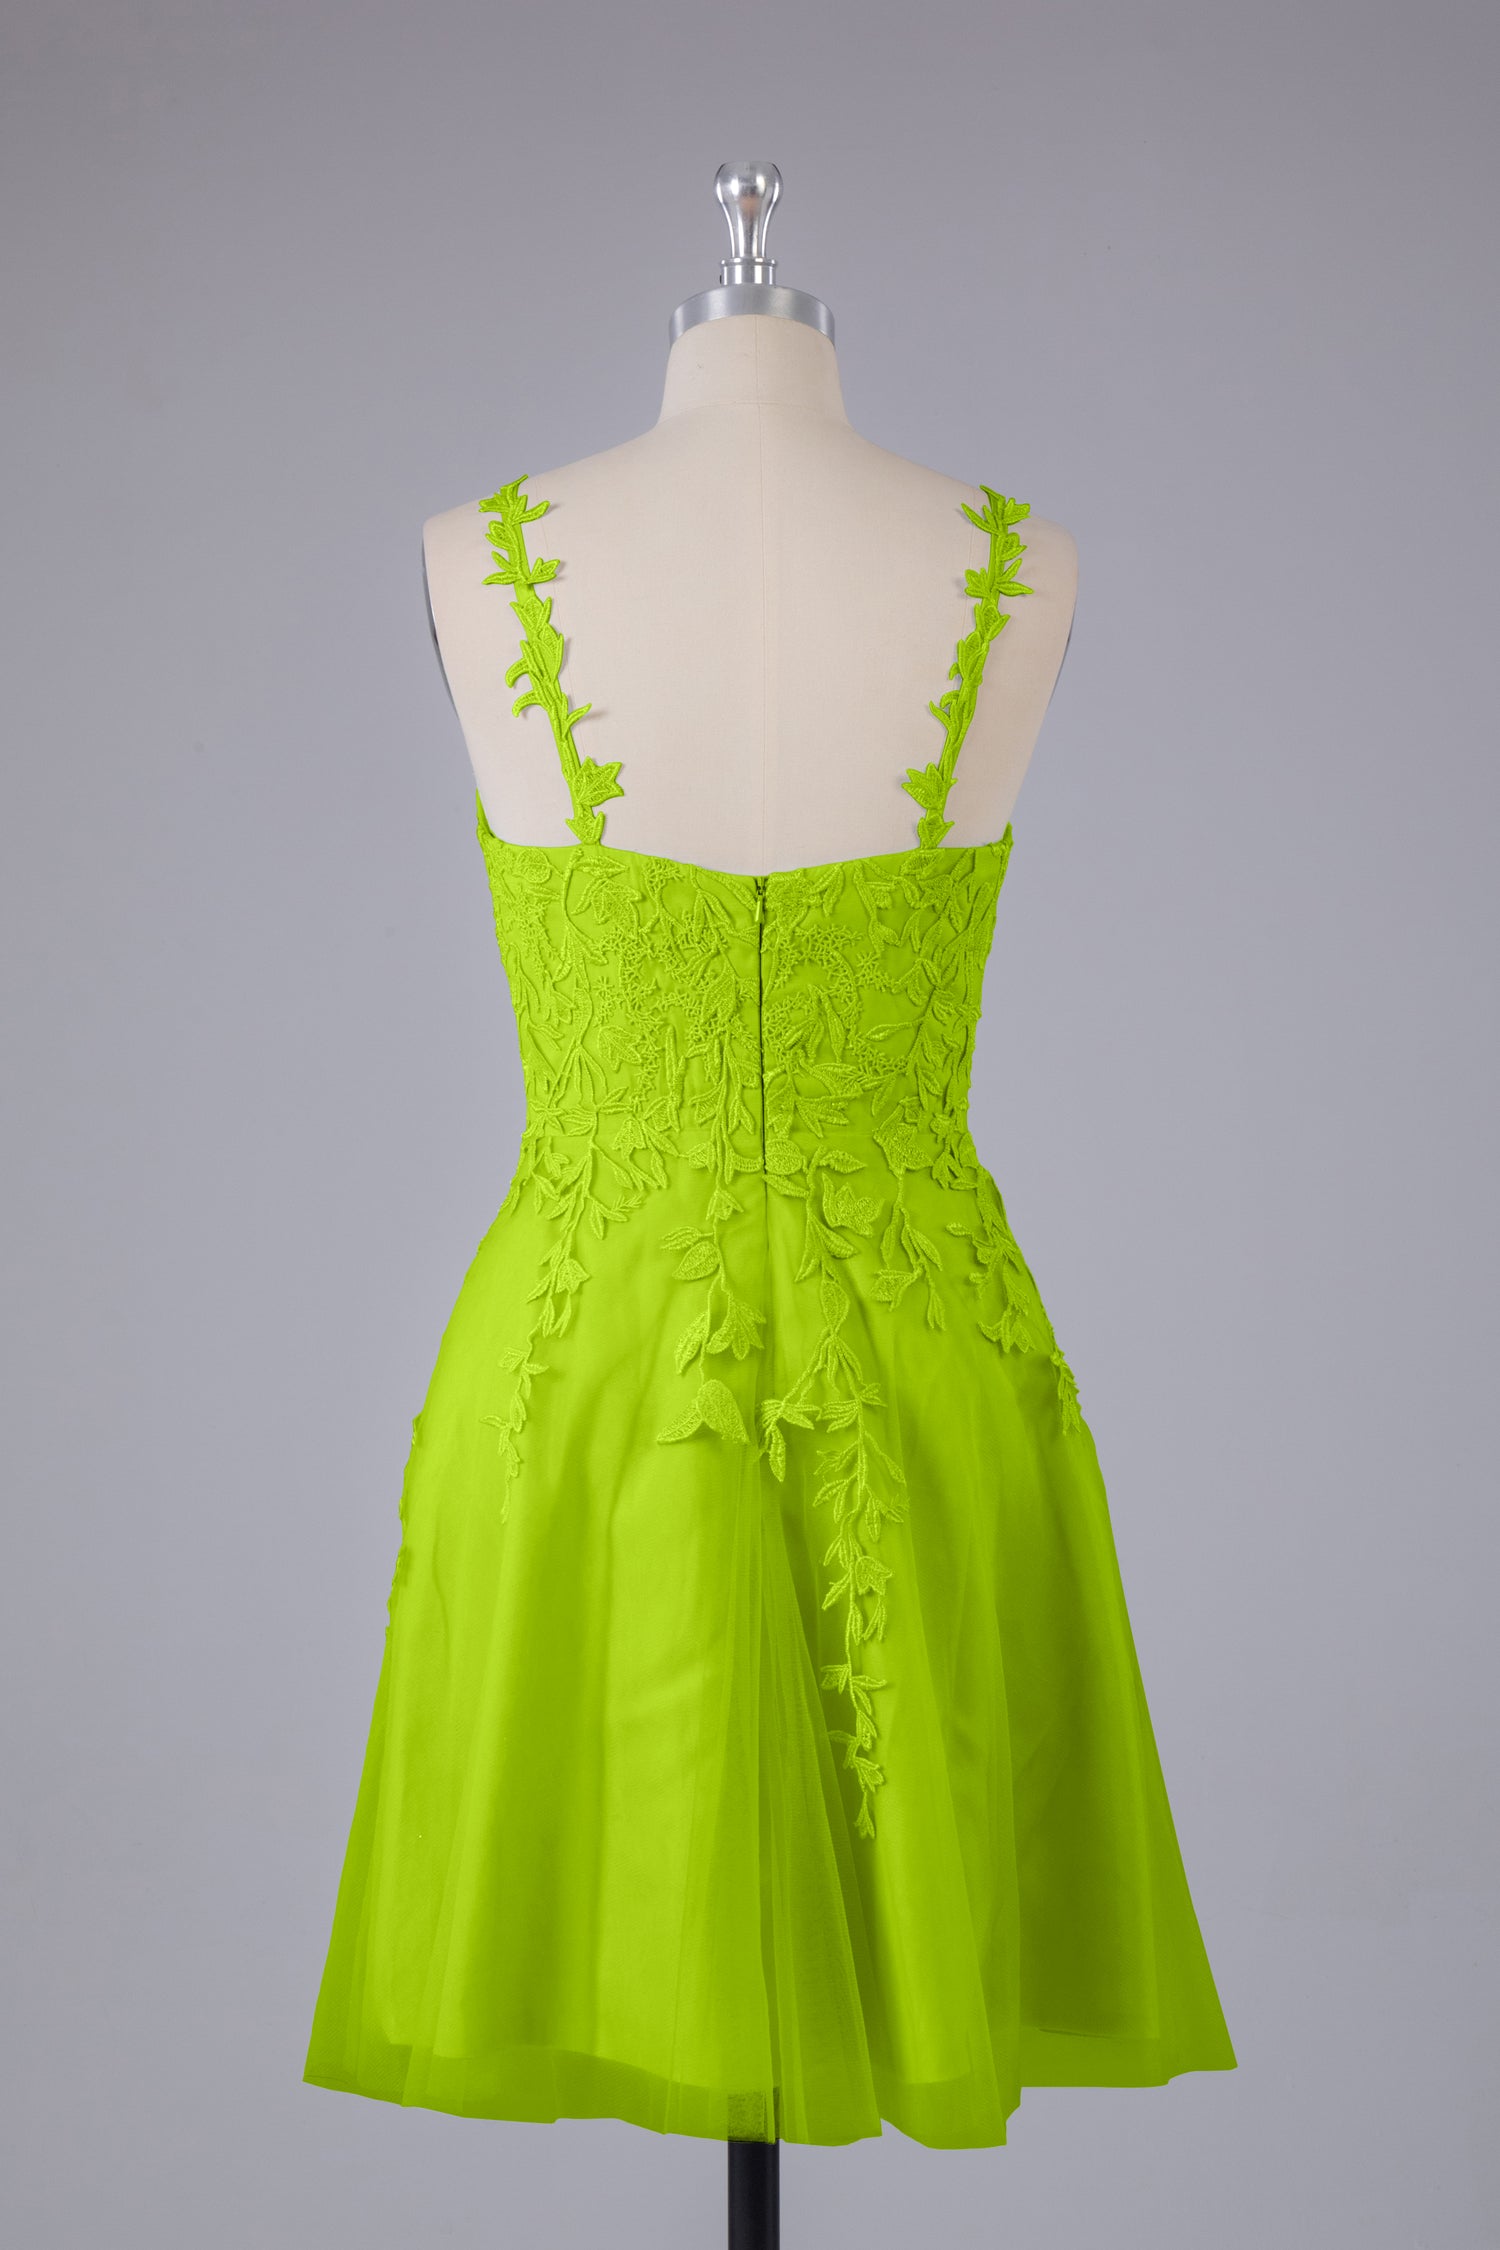 Lime_Green